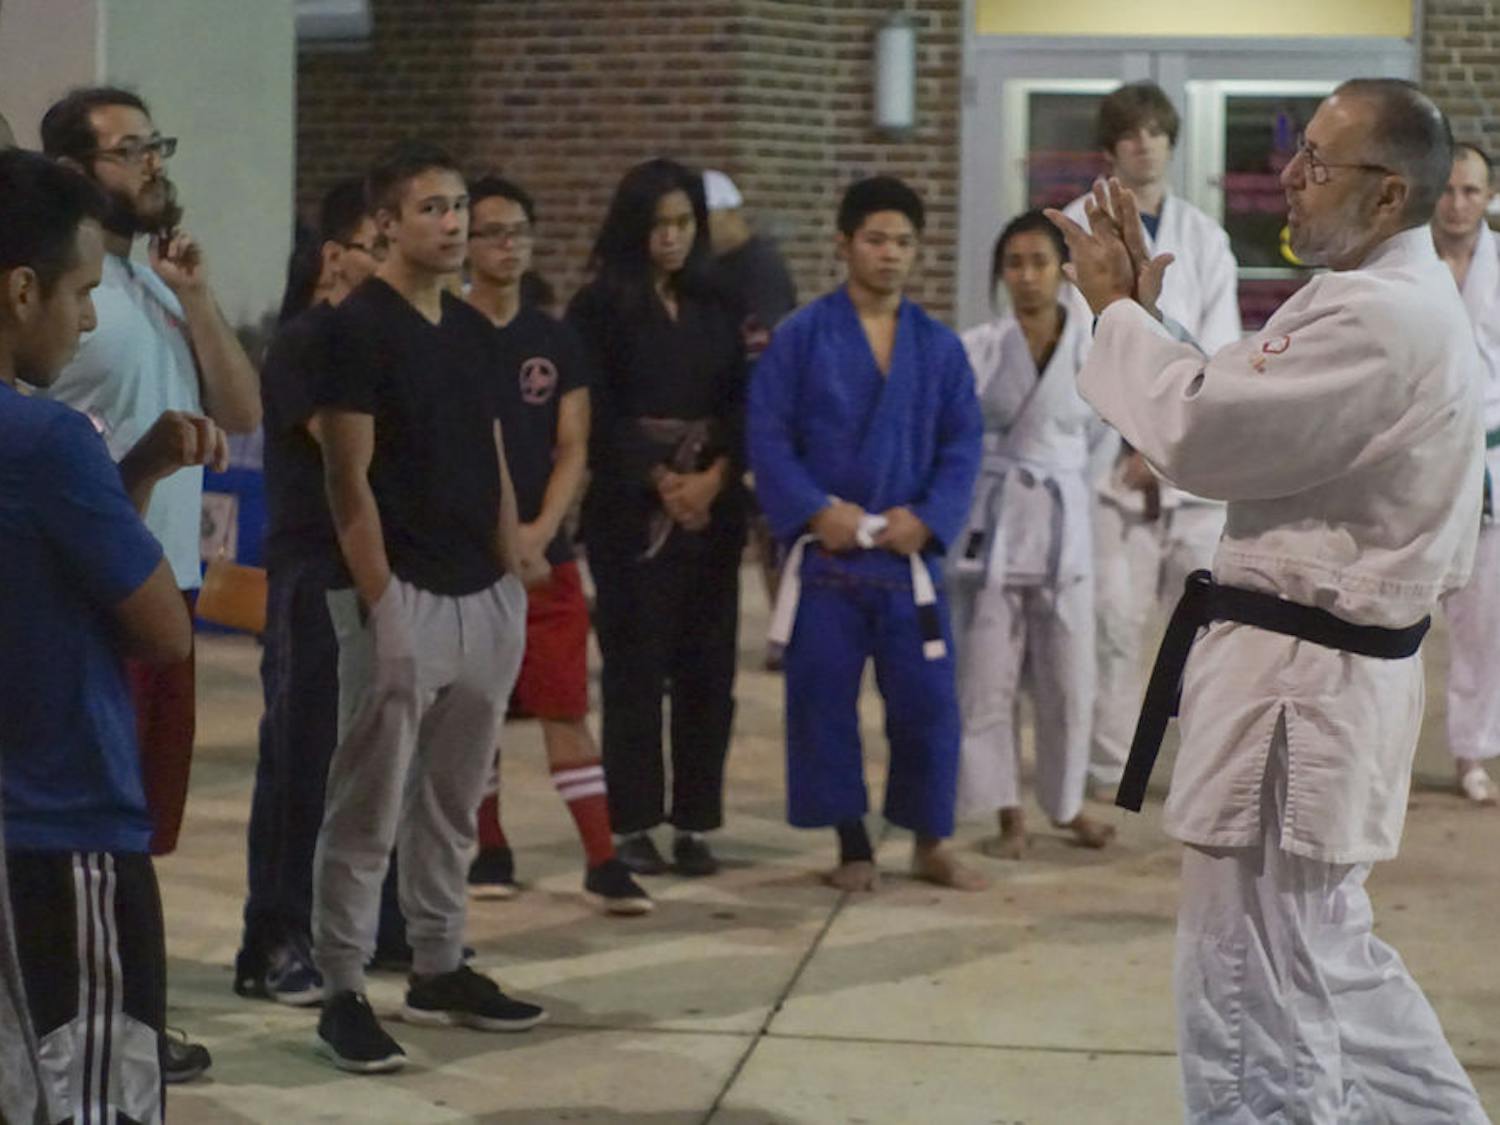 John Kammer, 66, teaches students the basics of judo Oct. 13, 2015, at Ben Hill Griffin Stadium during Asian Kaleidoscope Month’s Throwdown event. Kammer has been teaching judo for 43 years. He instructed students on basic techniques of striking, clinch-fighting and breaking grips.